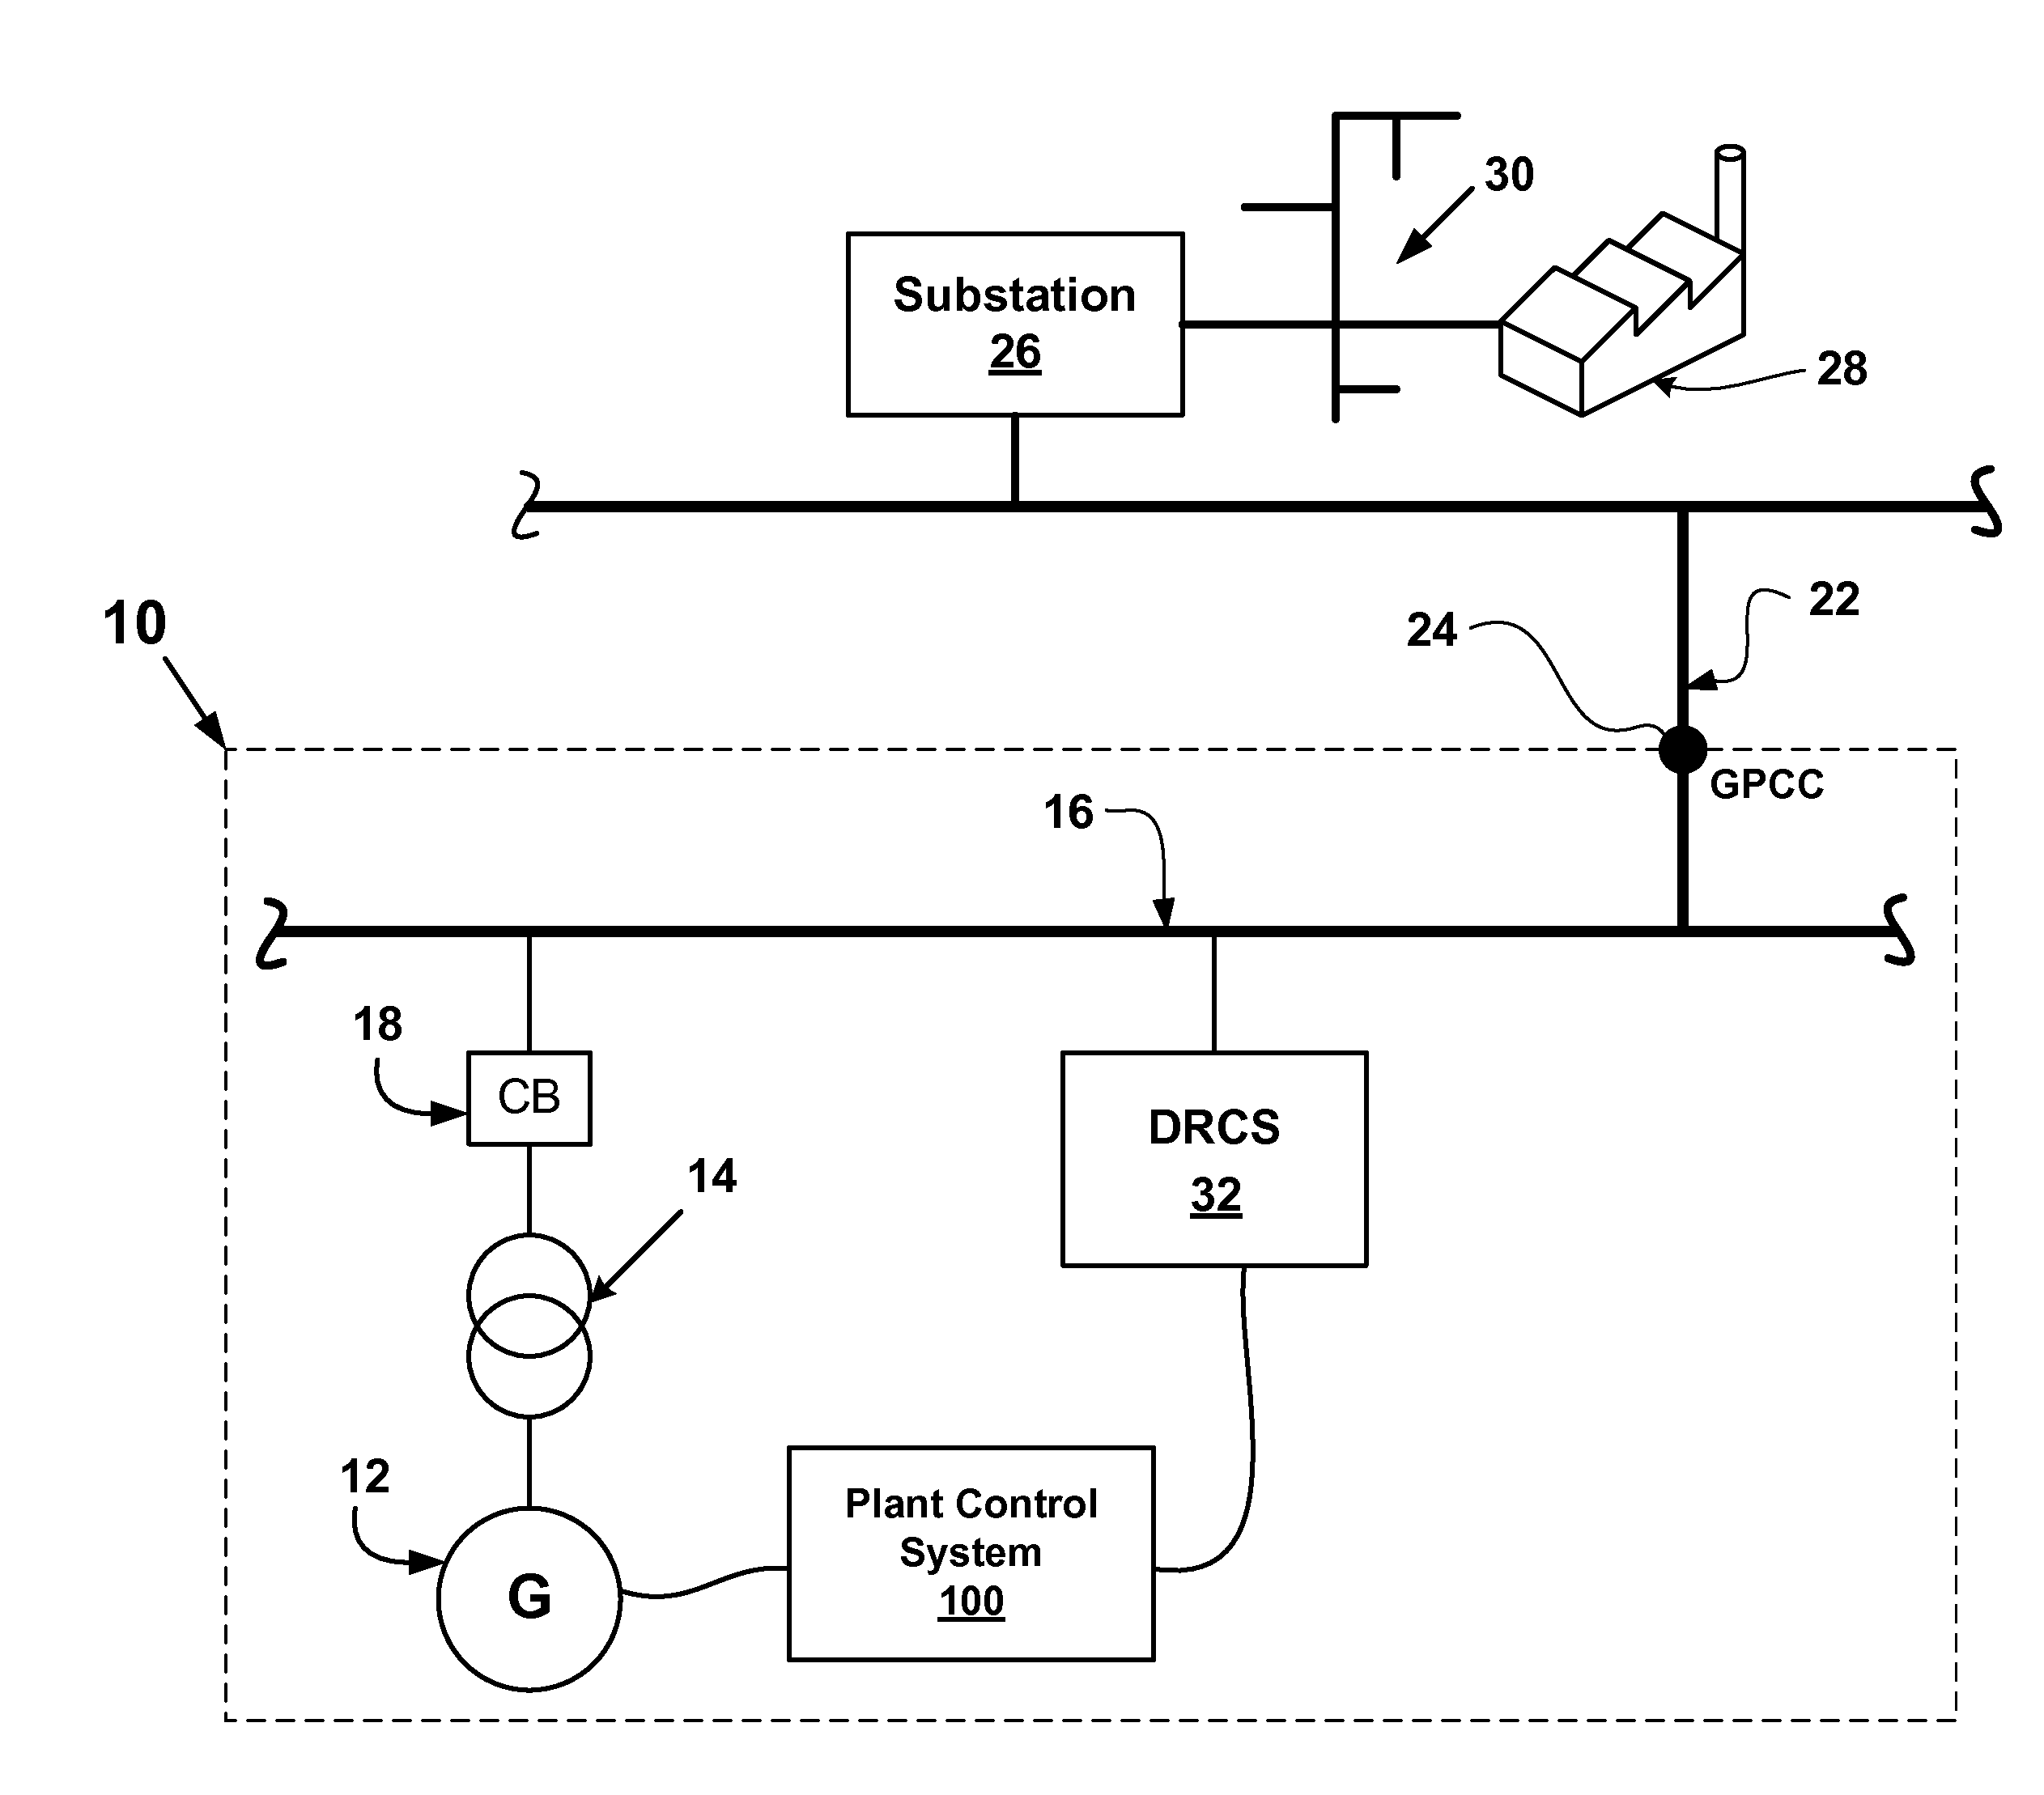 Method and apparatus for improving power generation in a thermal power plant